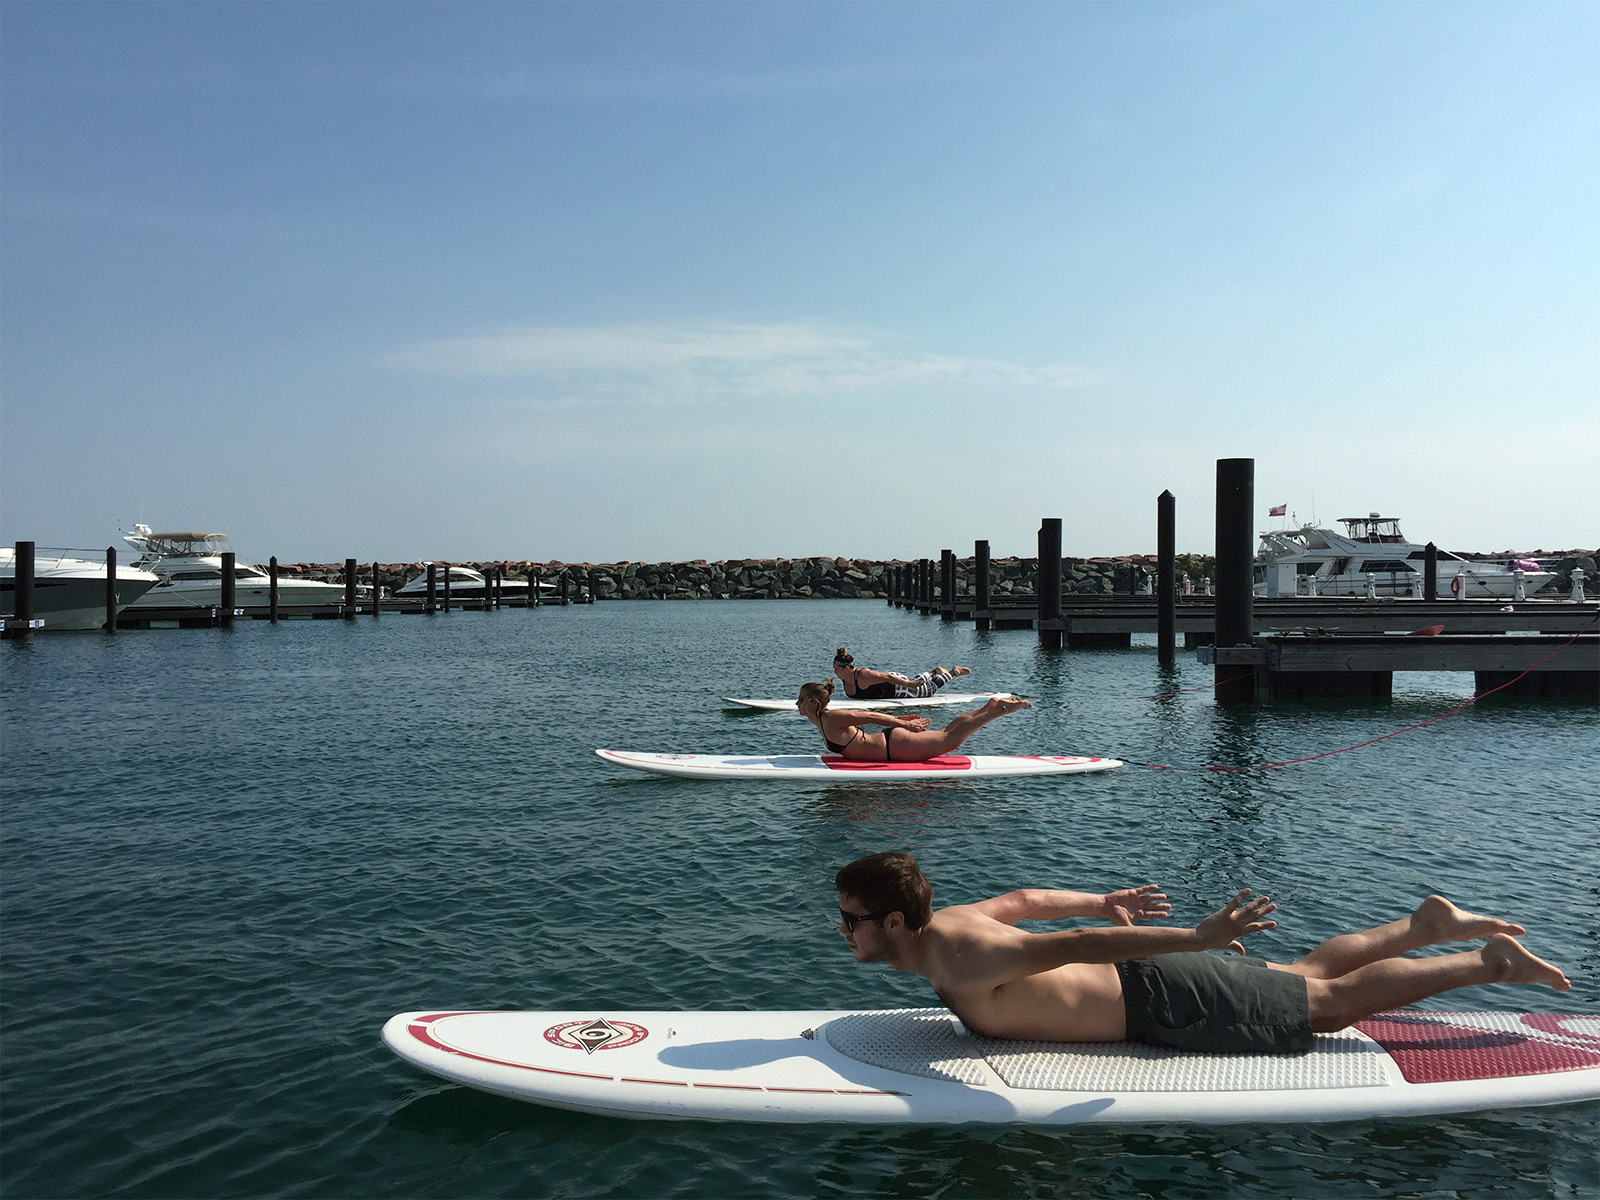 Light and easy backbends- SUP Yoga